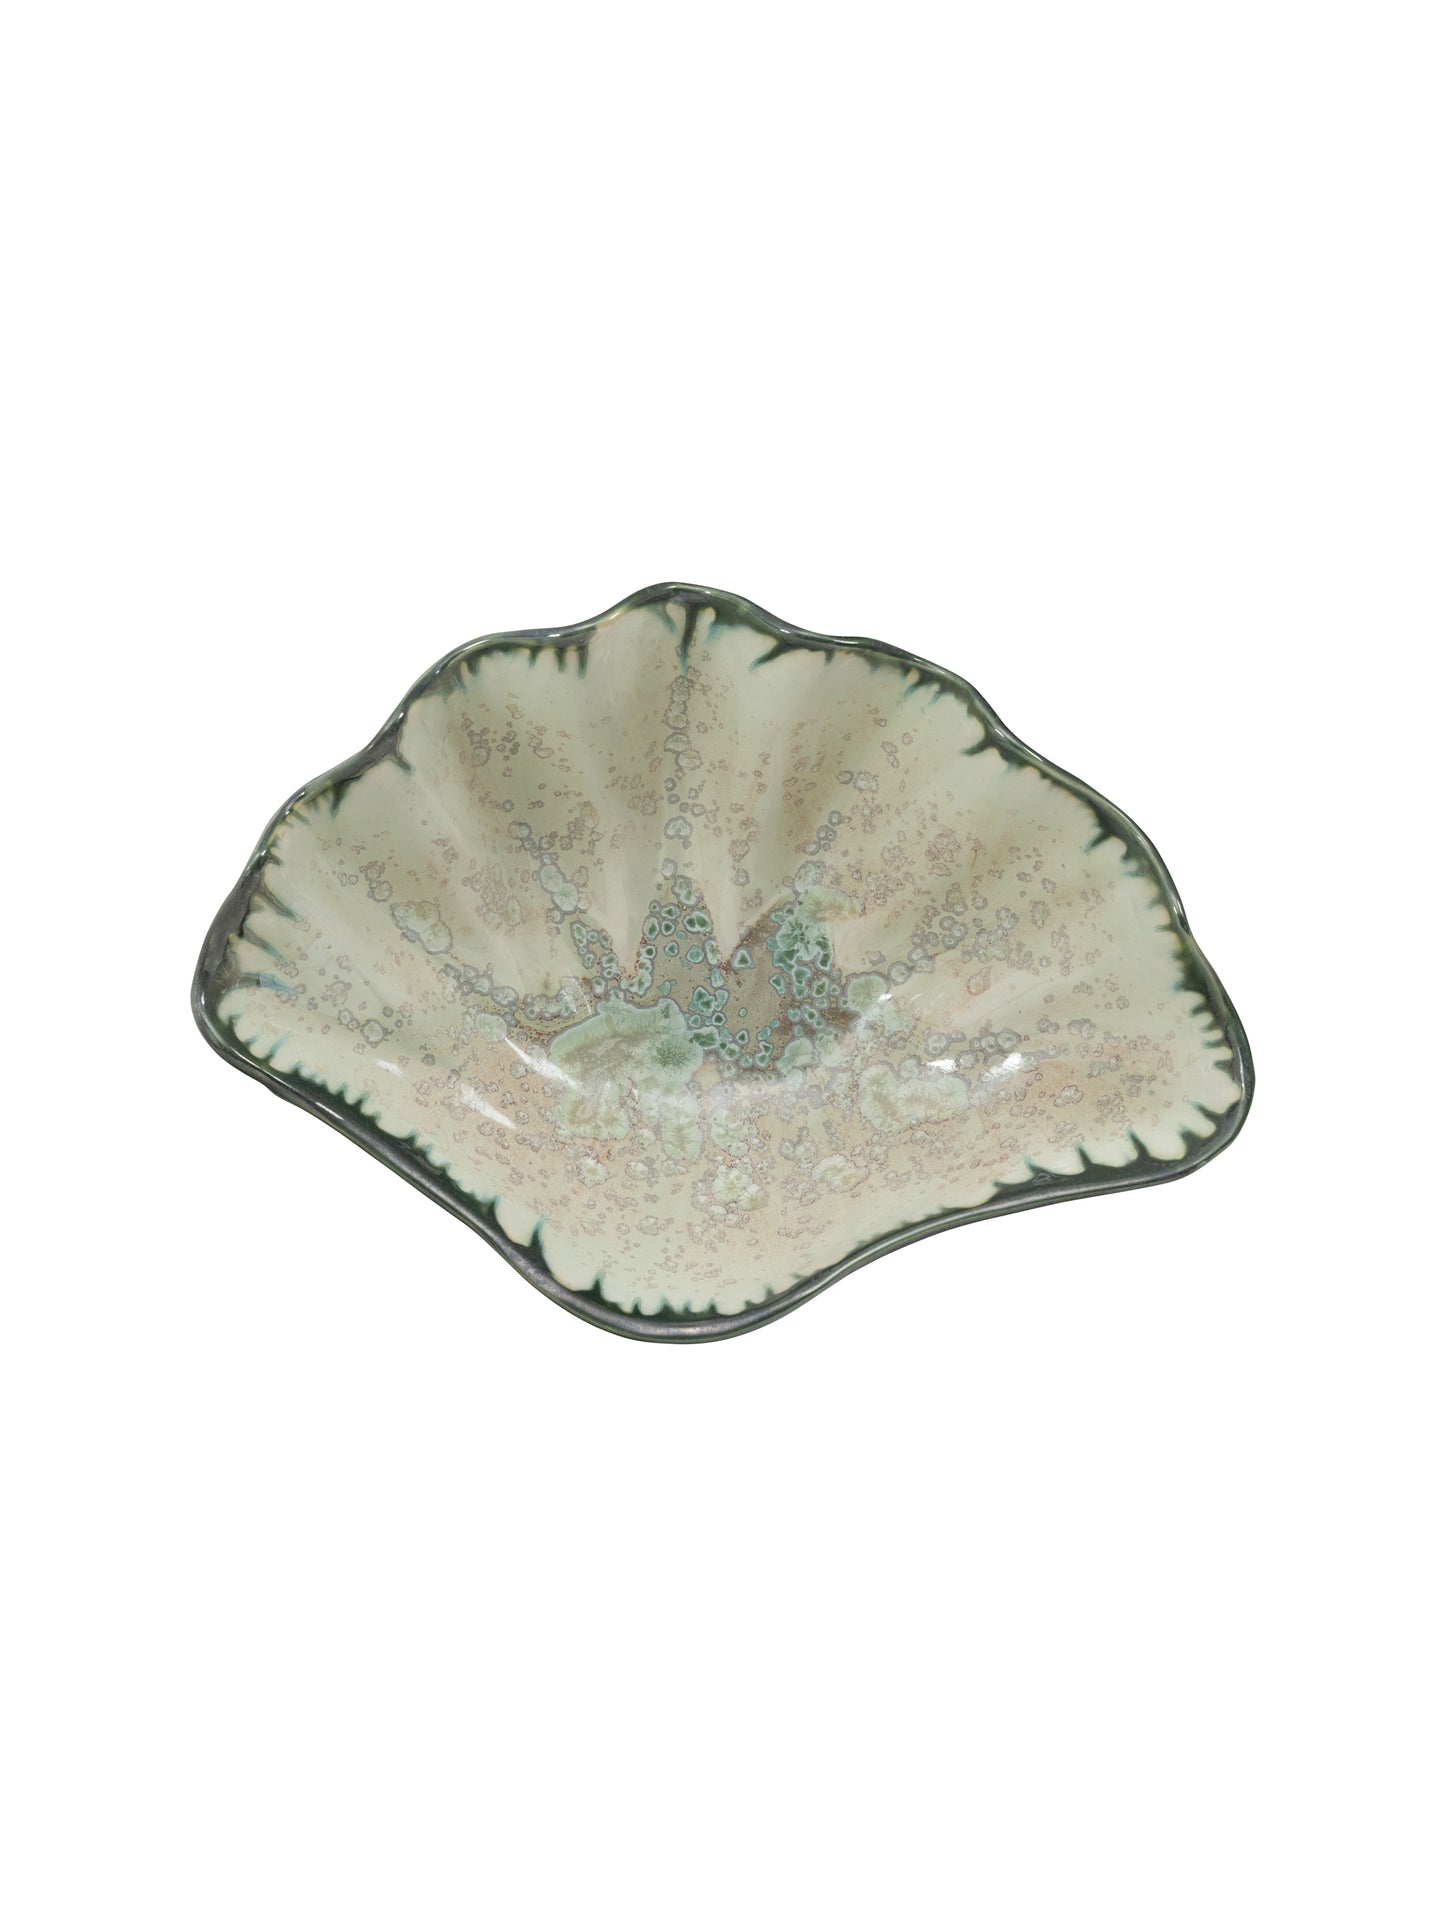 Mint and Charcoal Sea Clam Bowl Medium Weston Table